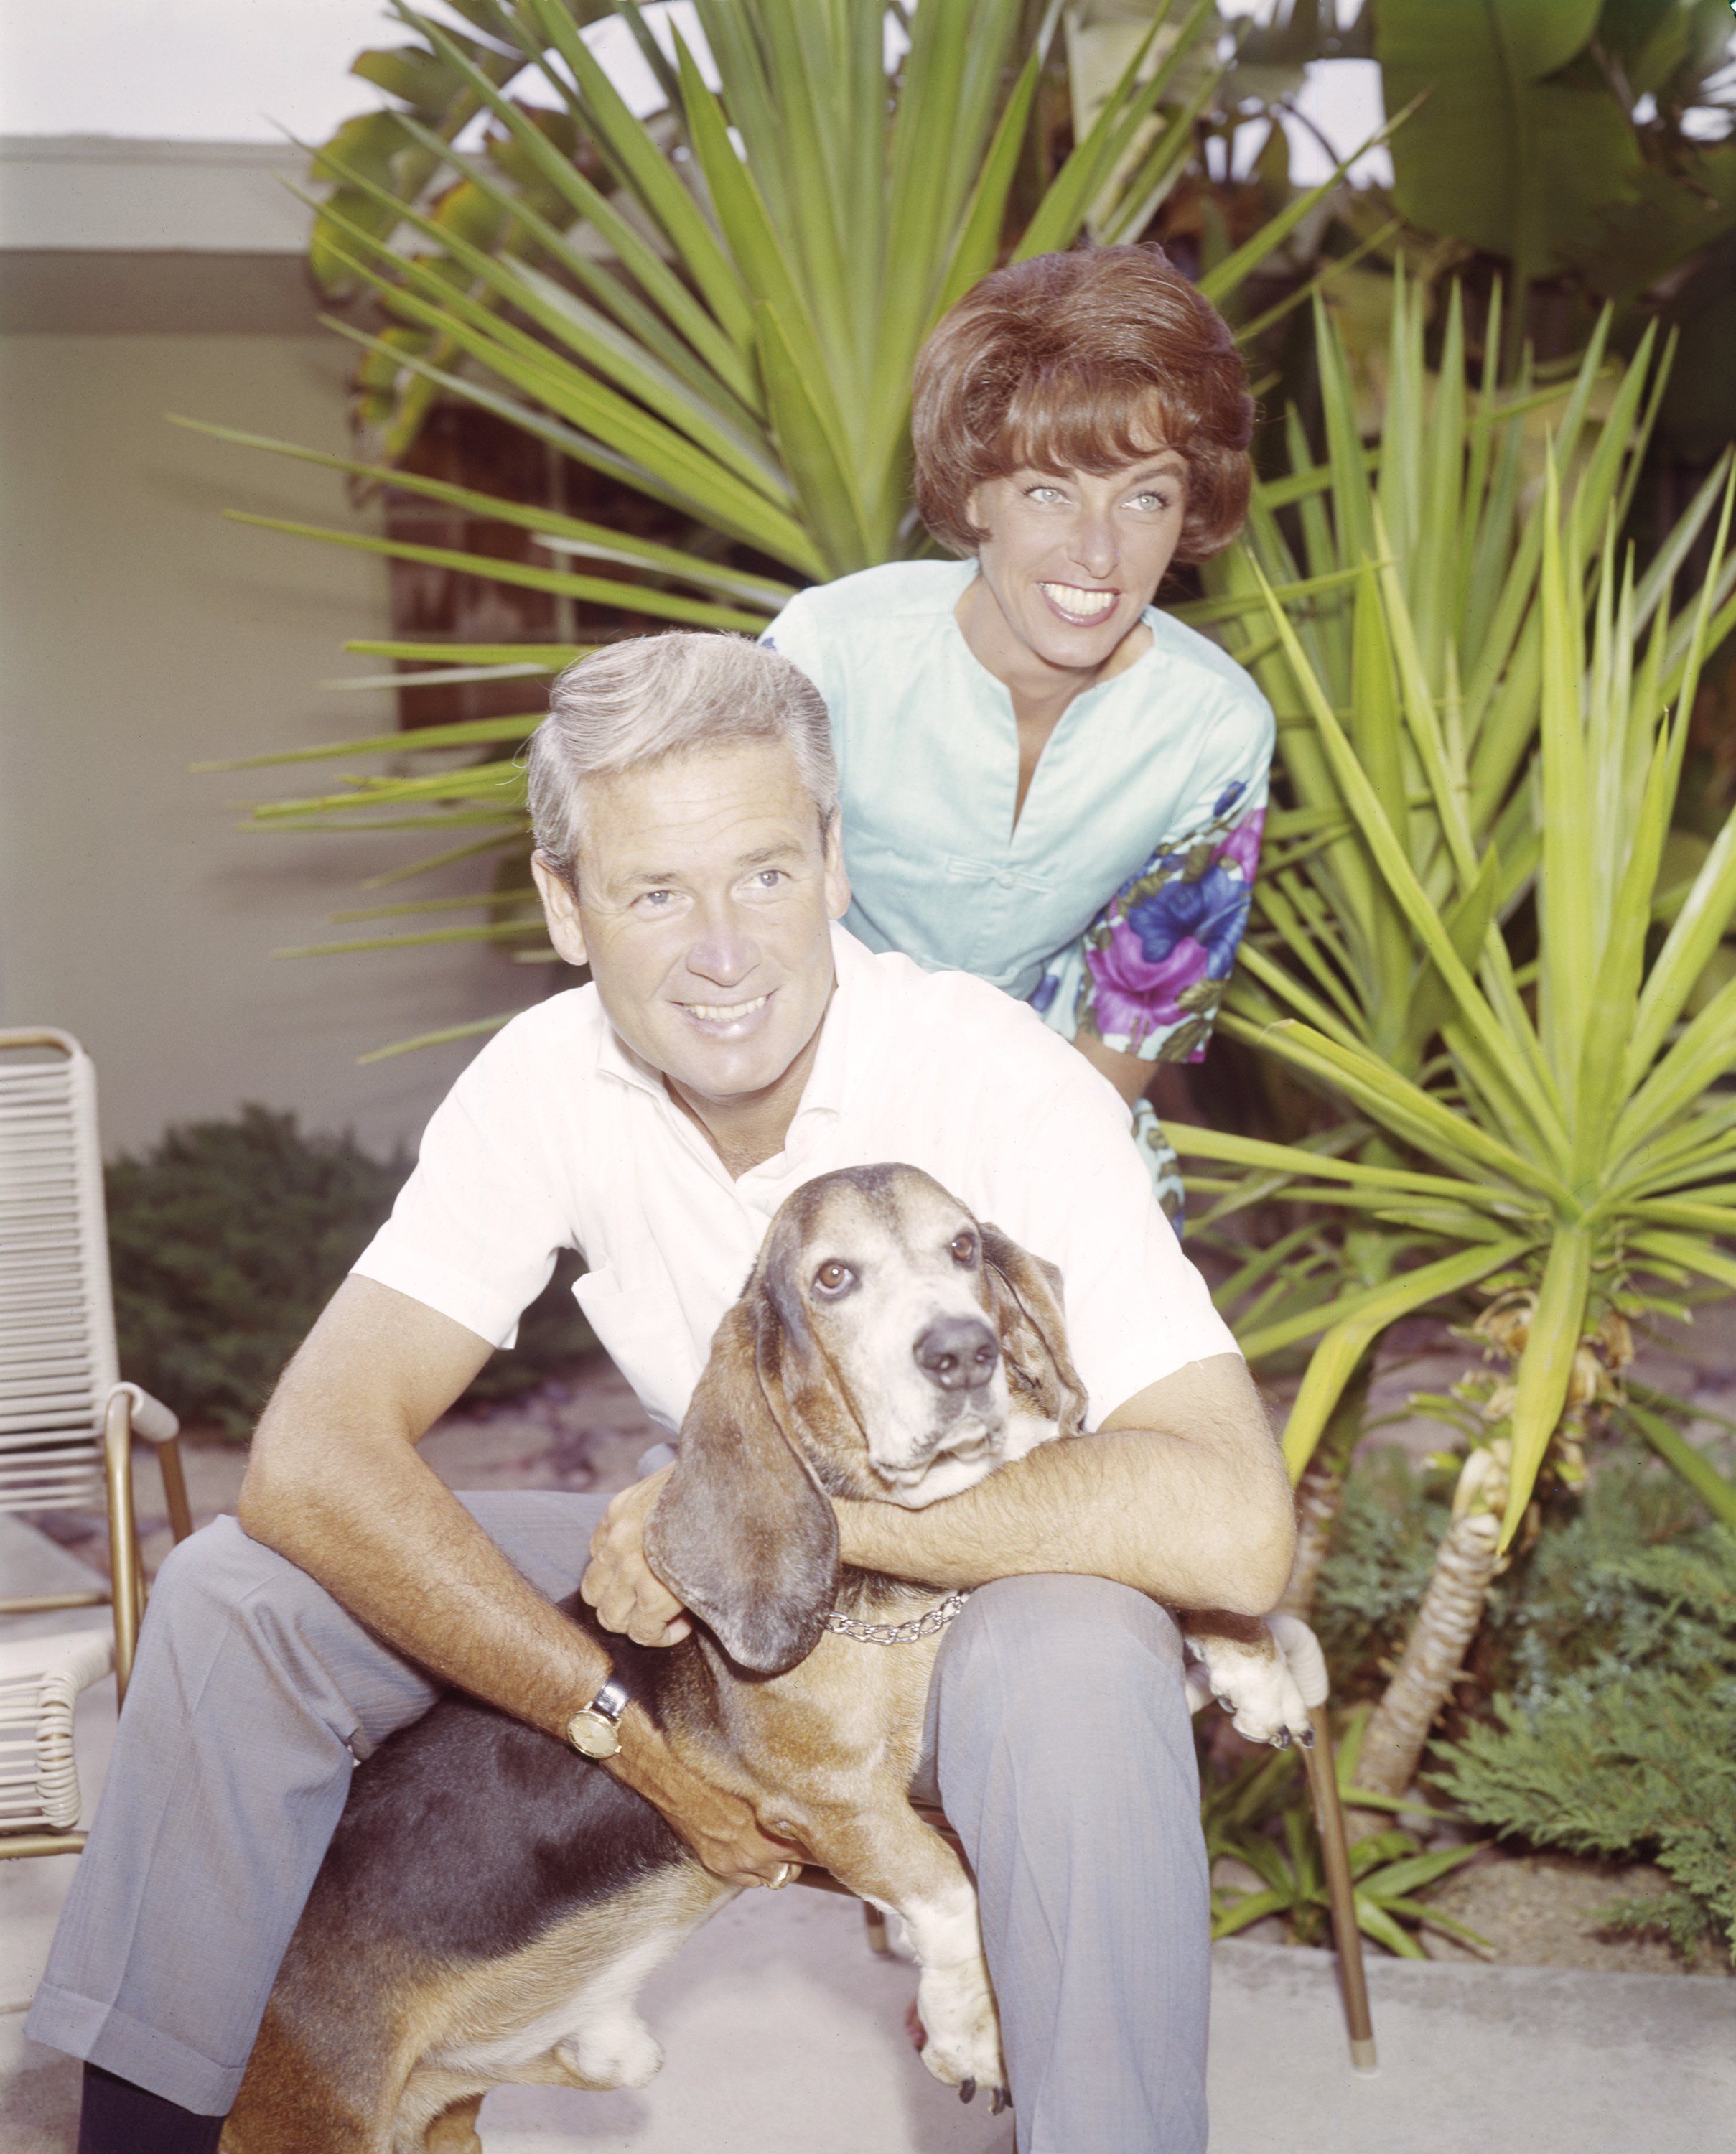 Bob Barker and his wife Dorothy Jo Barker were smiling while taking a picture with their dog. | Source: Getty Images